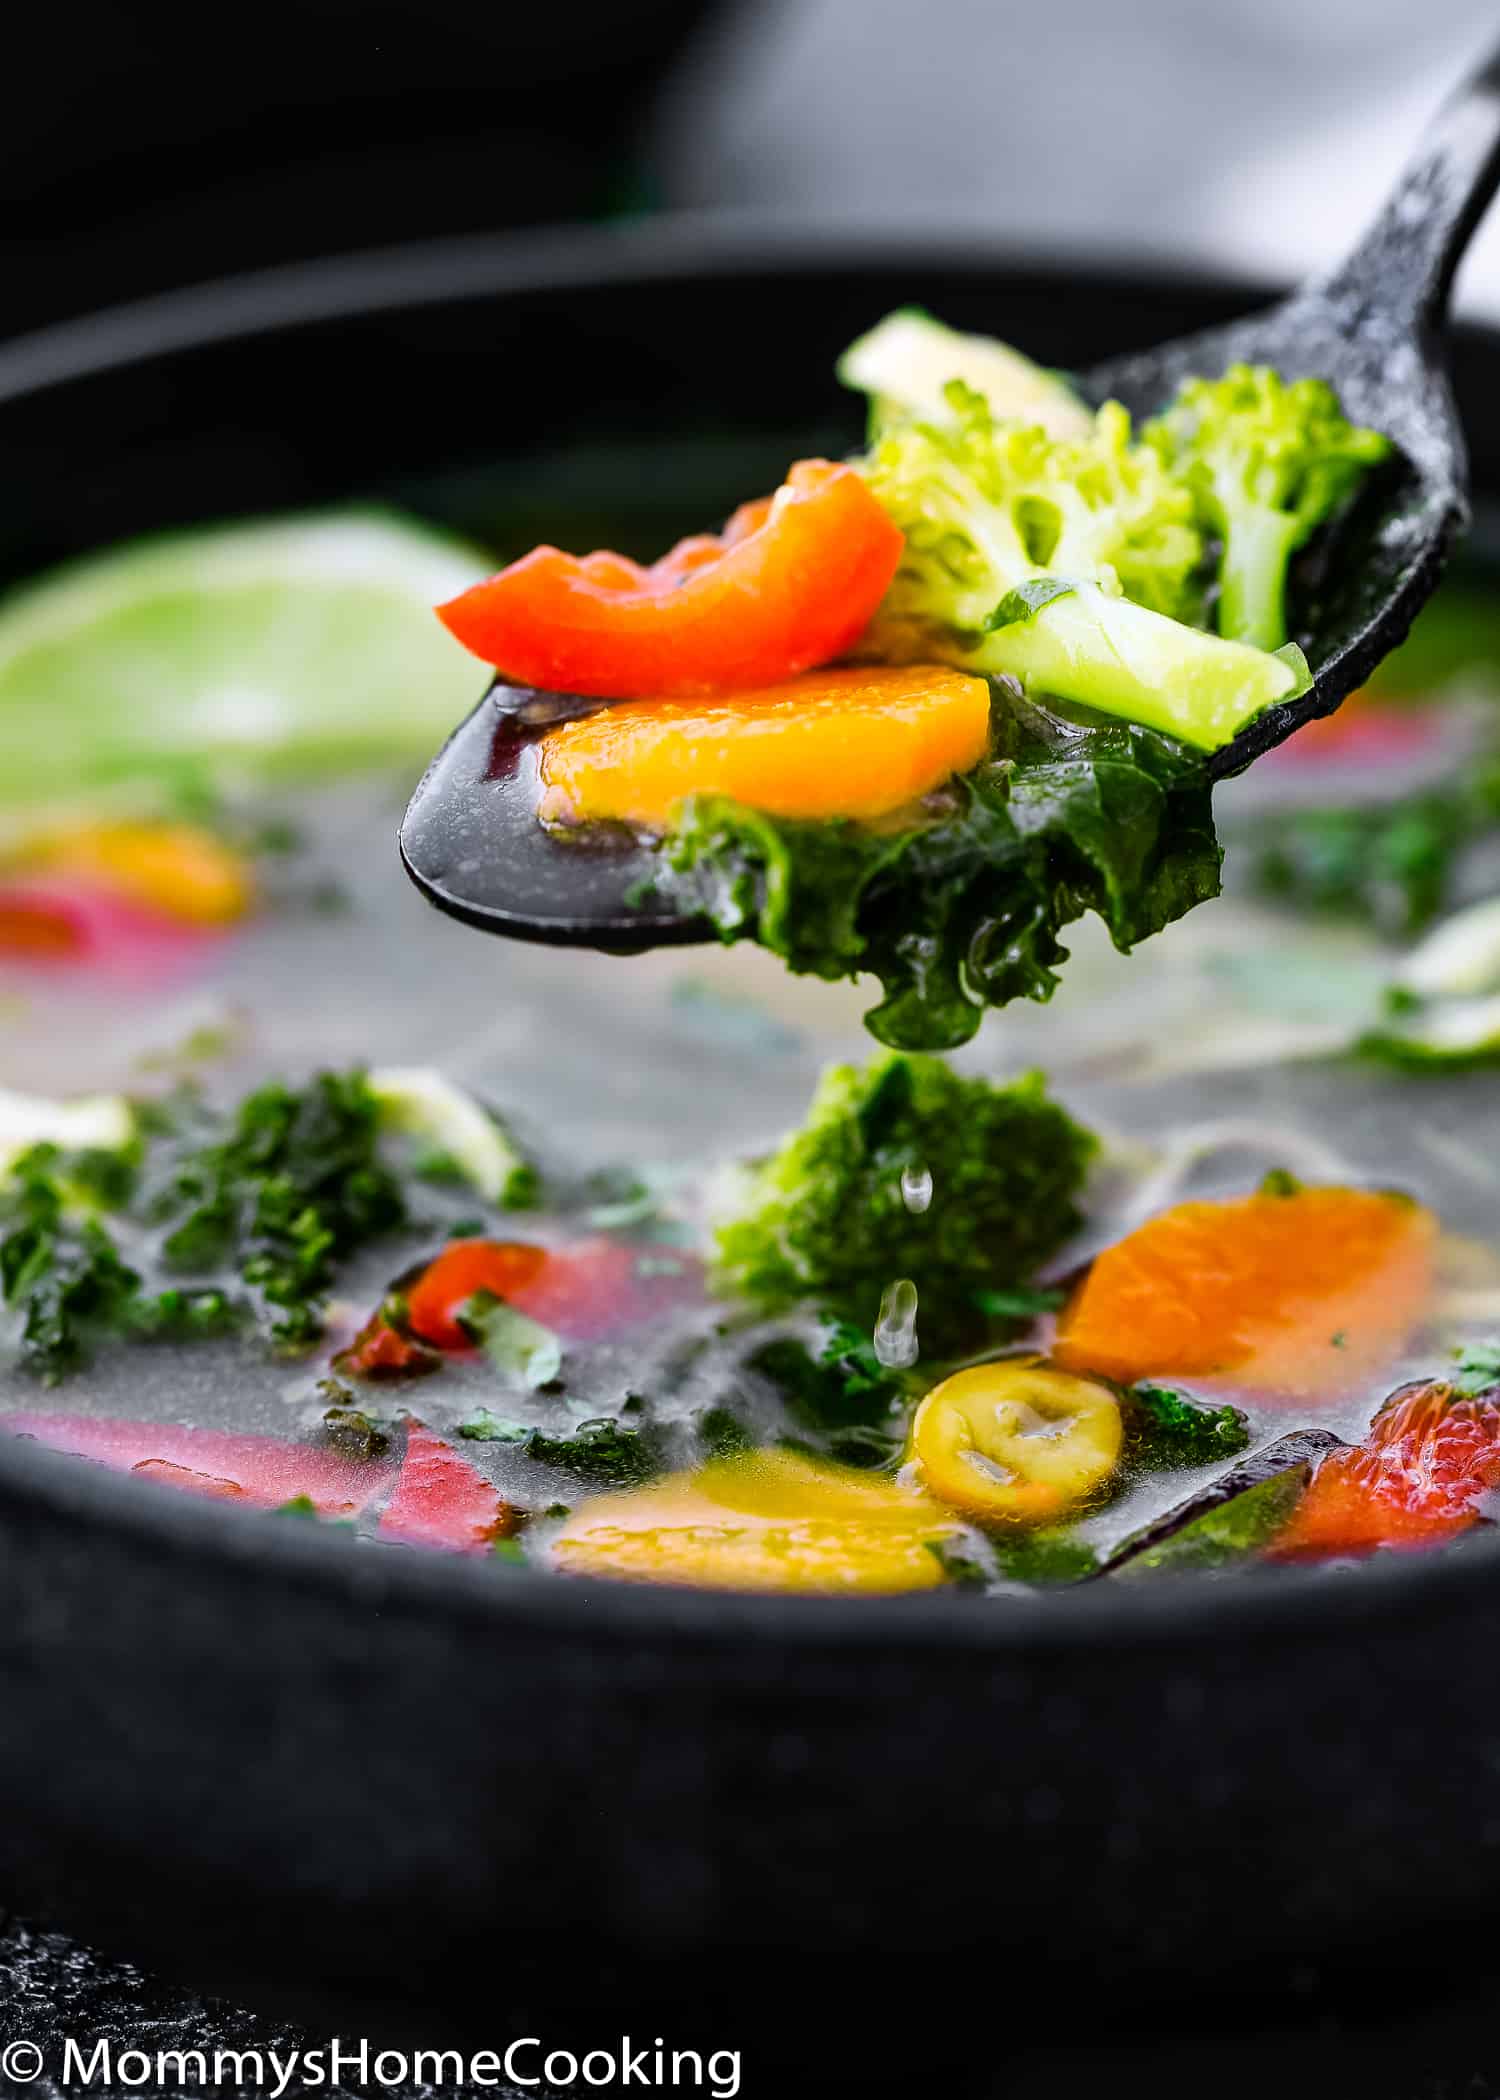 This Easy Instant Pot Detox Soup is delicious, comforting, flavorful and healthy! Easy to make with wholesome ingredients, this soup will help you to reset your body every time you need it. https://mommyshomecooking.com